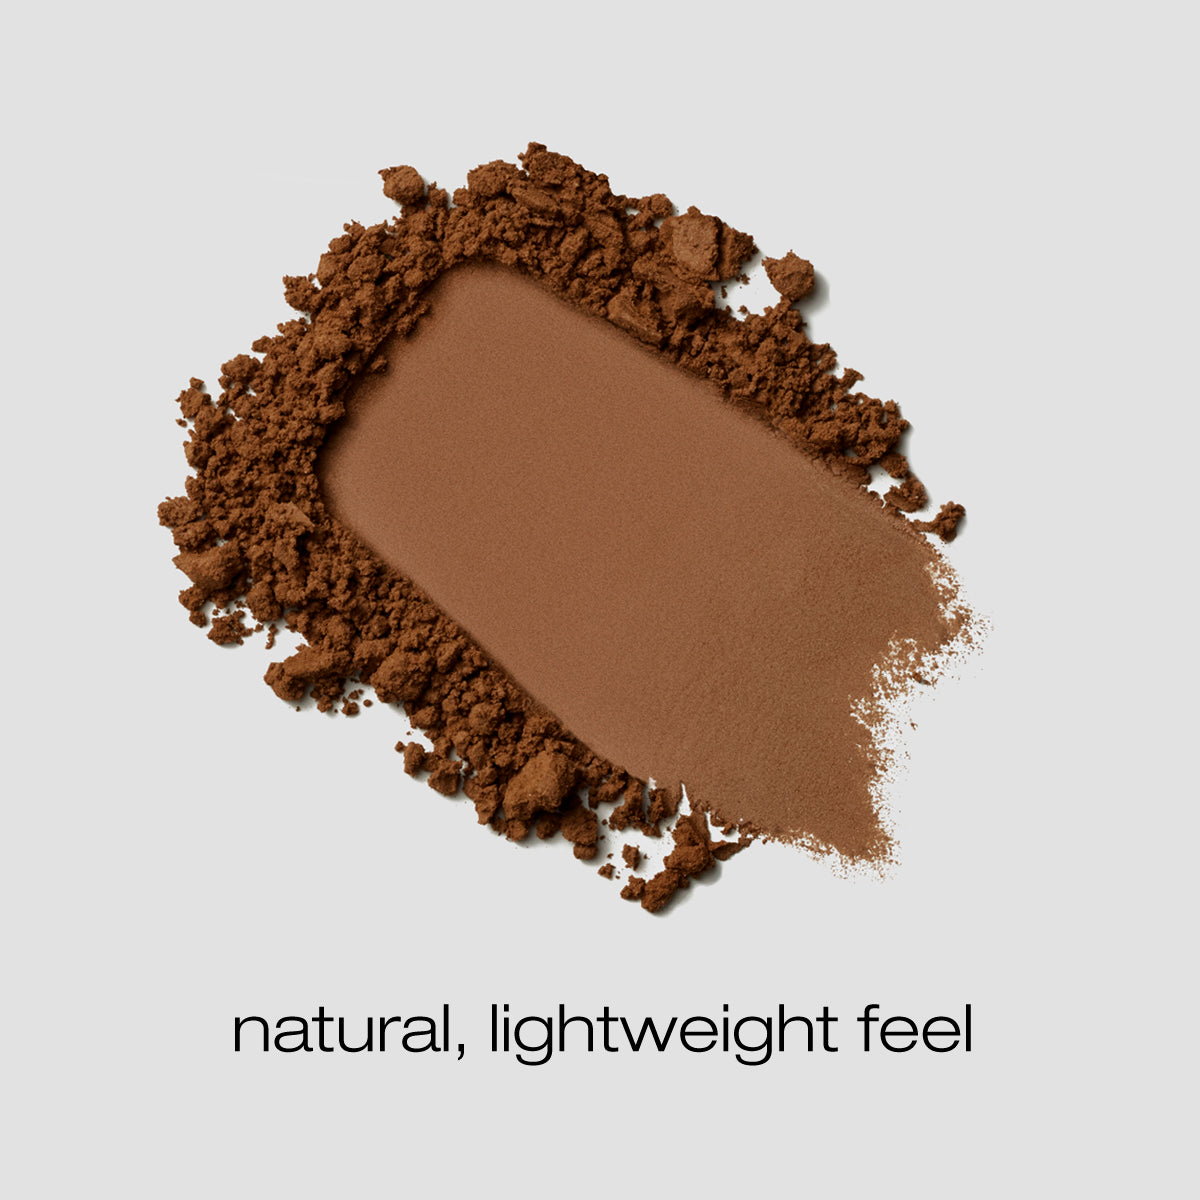 Spread of foundation powder described as a natural, lightweight feel